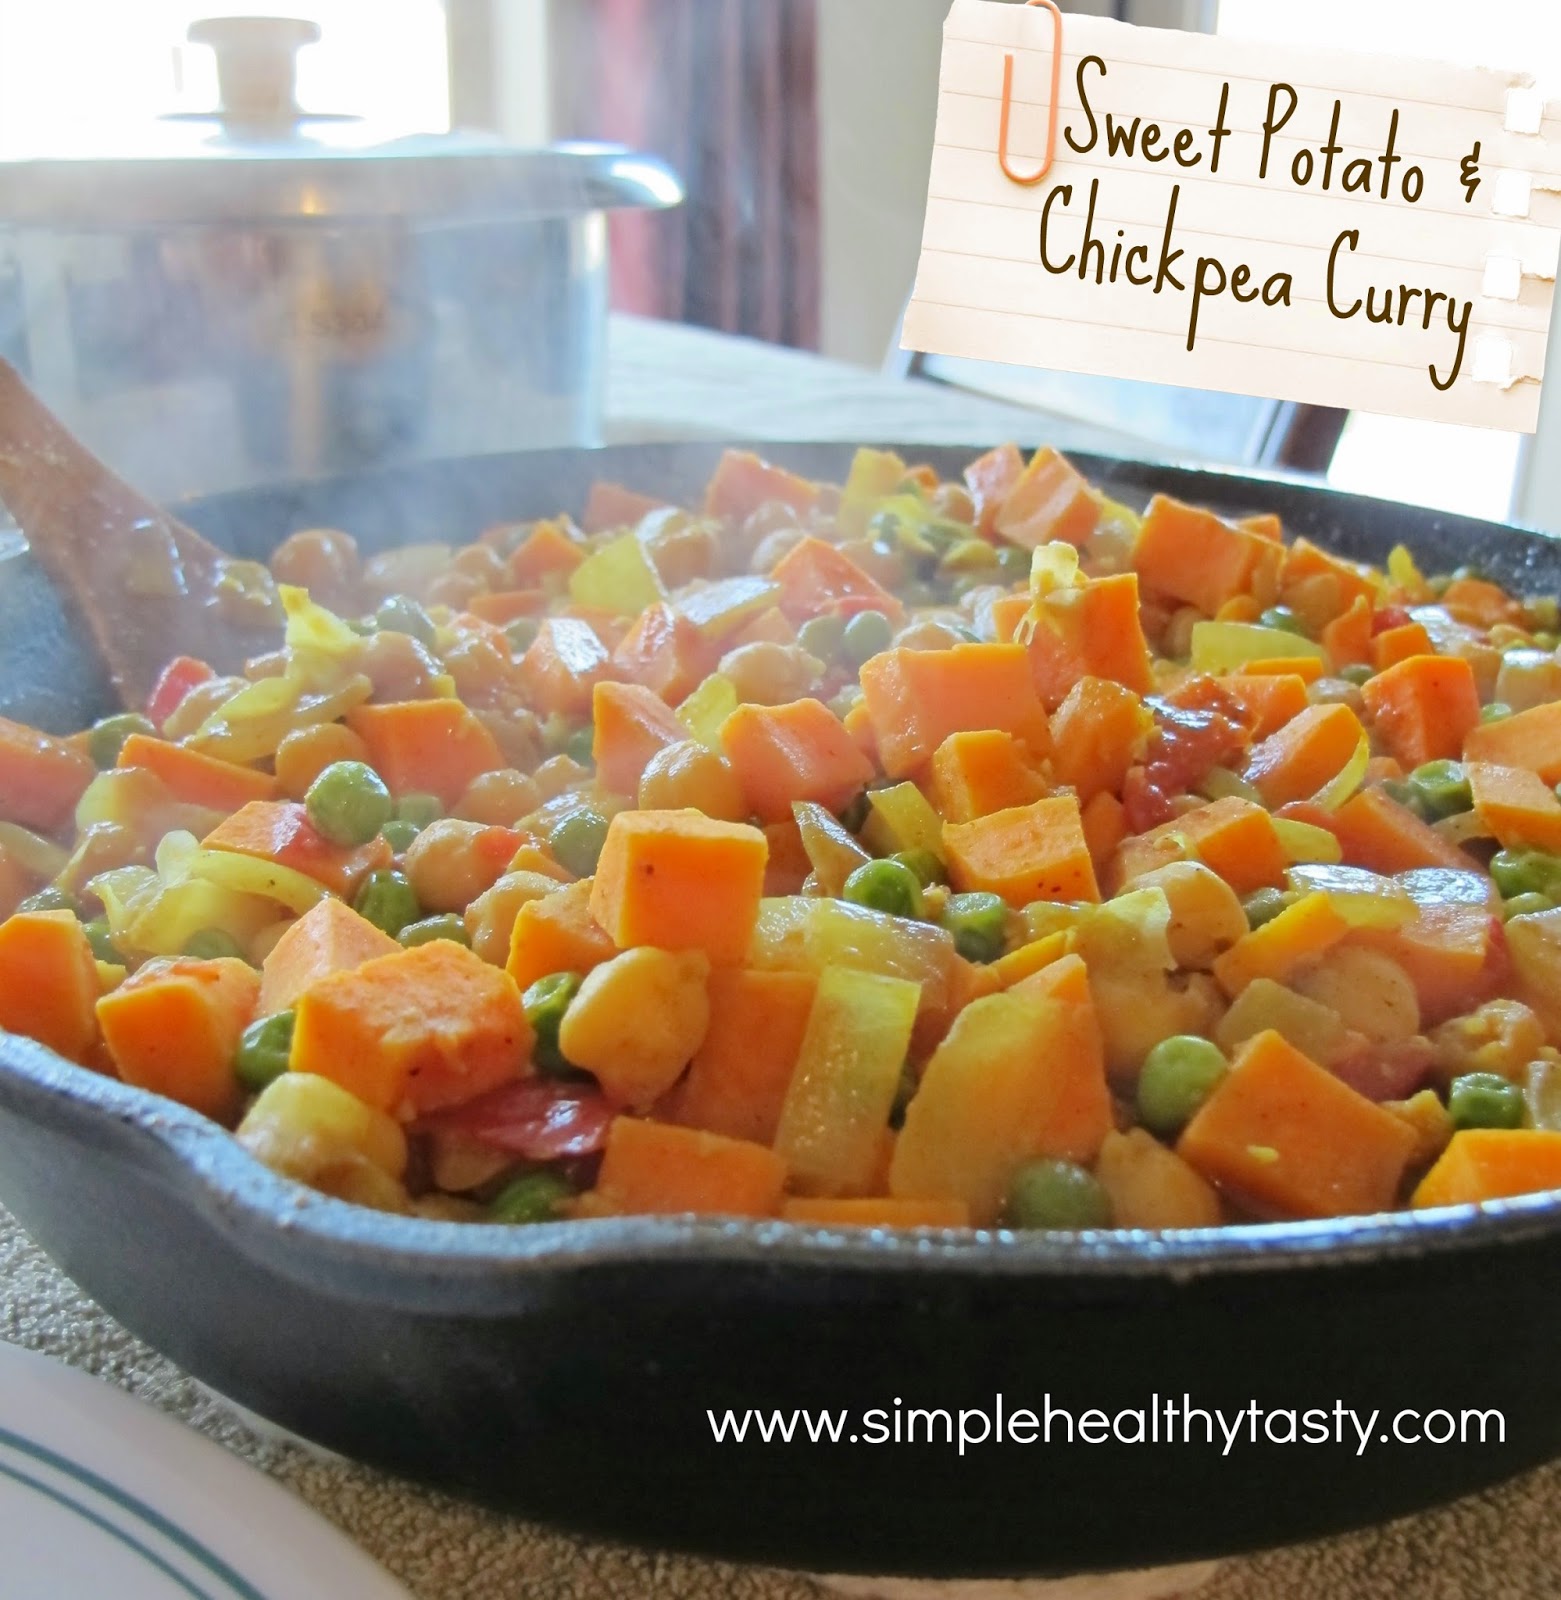 Sweet Potatoes, Chickpeas, Curry Dish